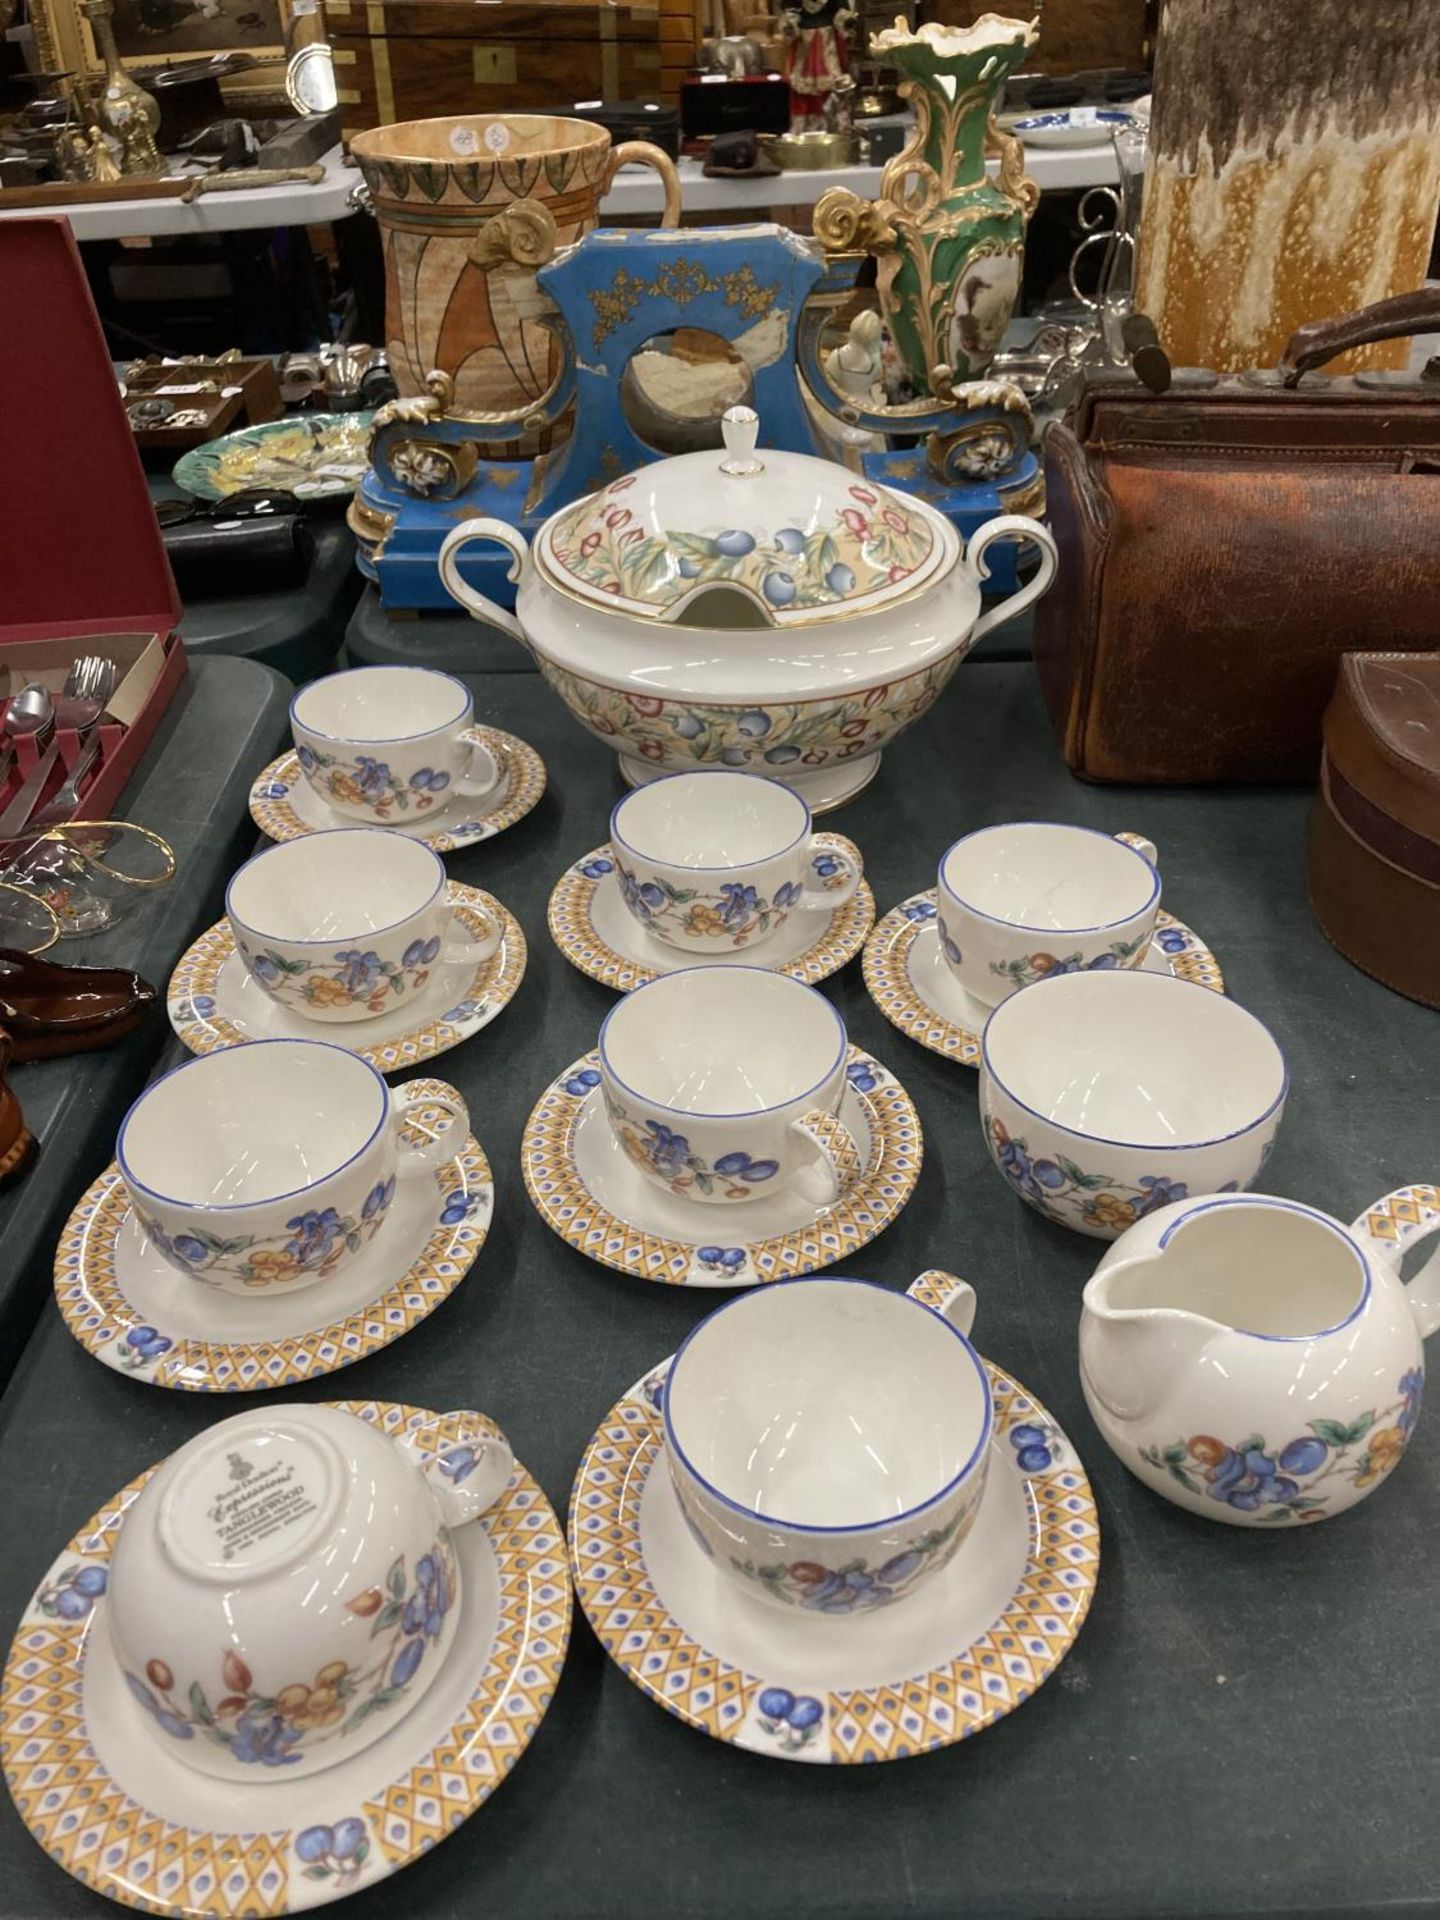 A QUANTITY OF ROYAL DOULTON EXPRESSIONS 'TANGLEWOOD' TO INCLUDE CUPS, SAUCERS, A TUREEN AND A